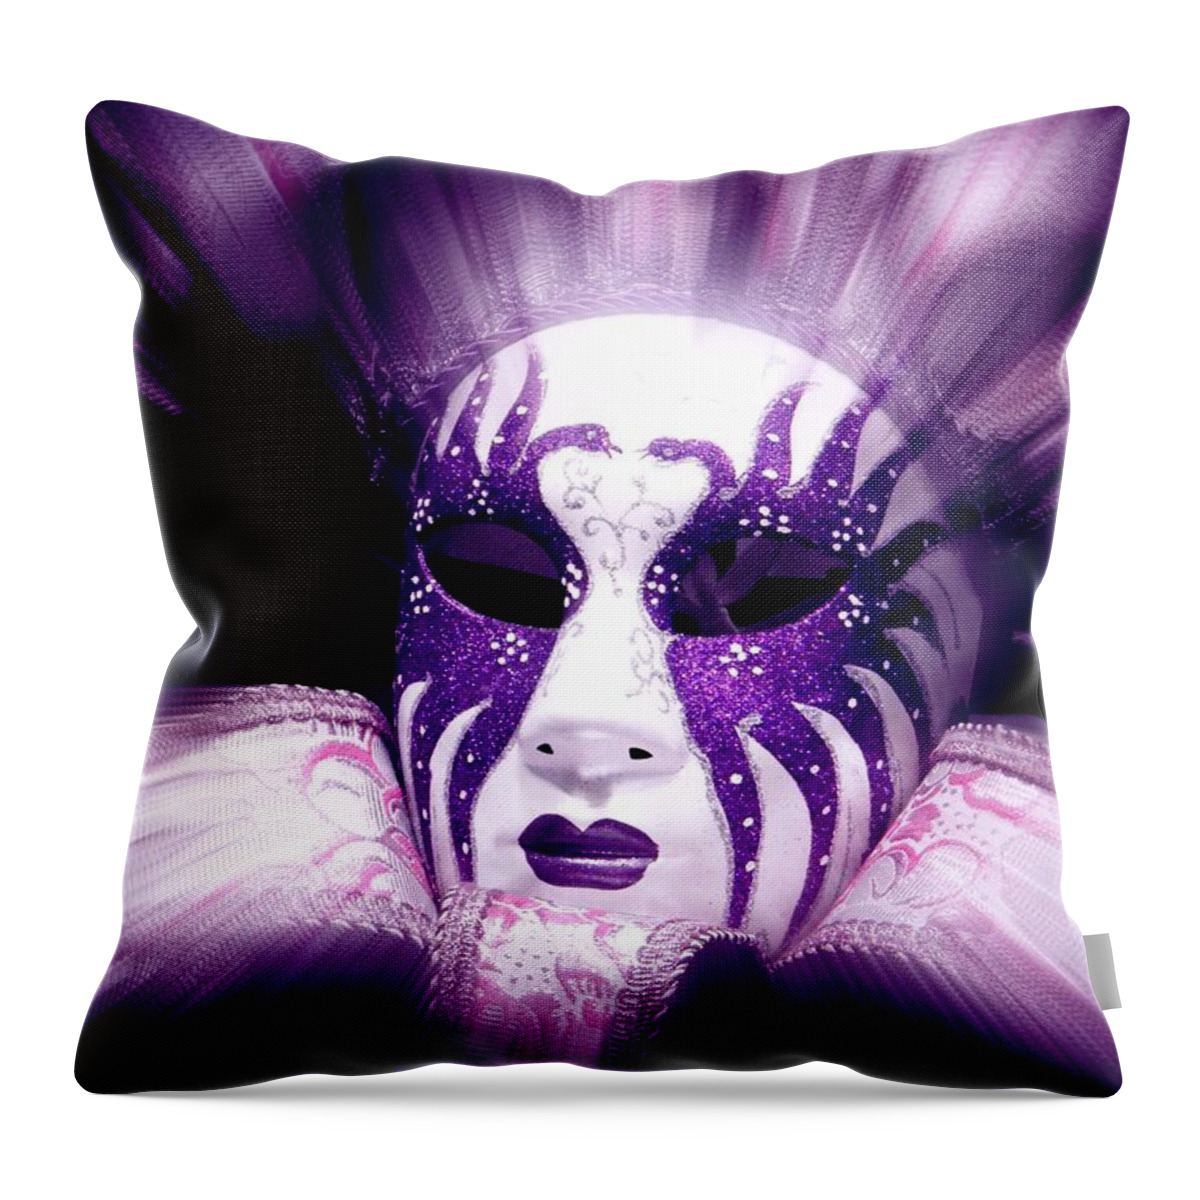 Purple Throw Pillow featuring the photograph Purple Mask Flash by Amanda Eberly